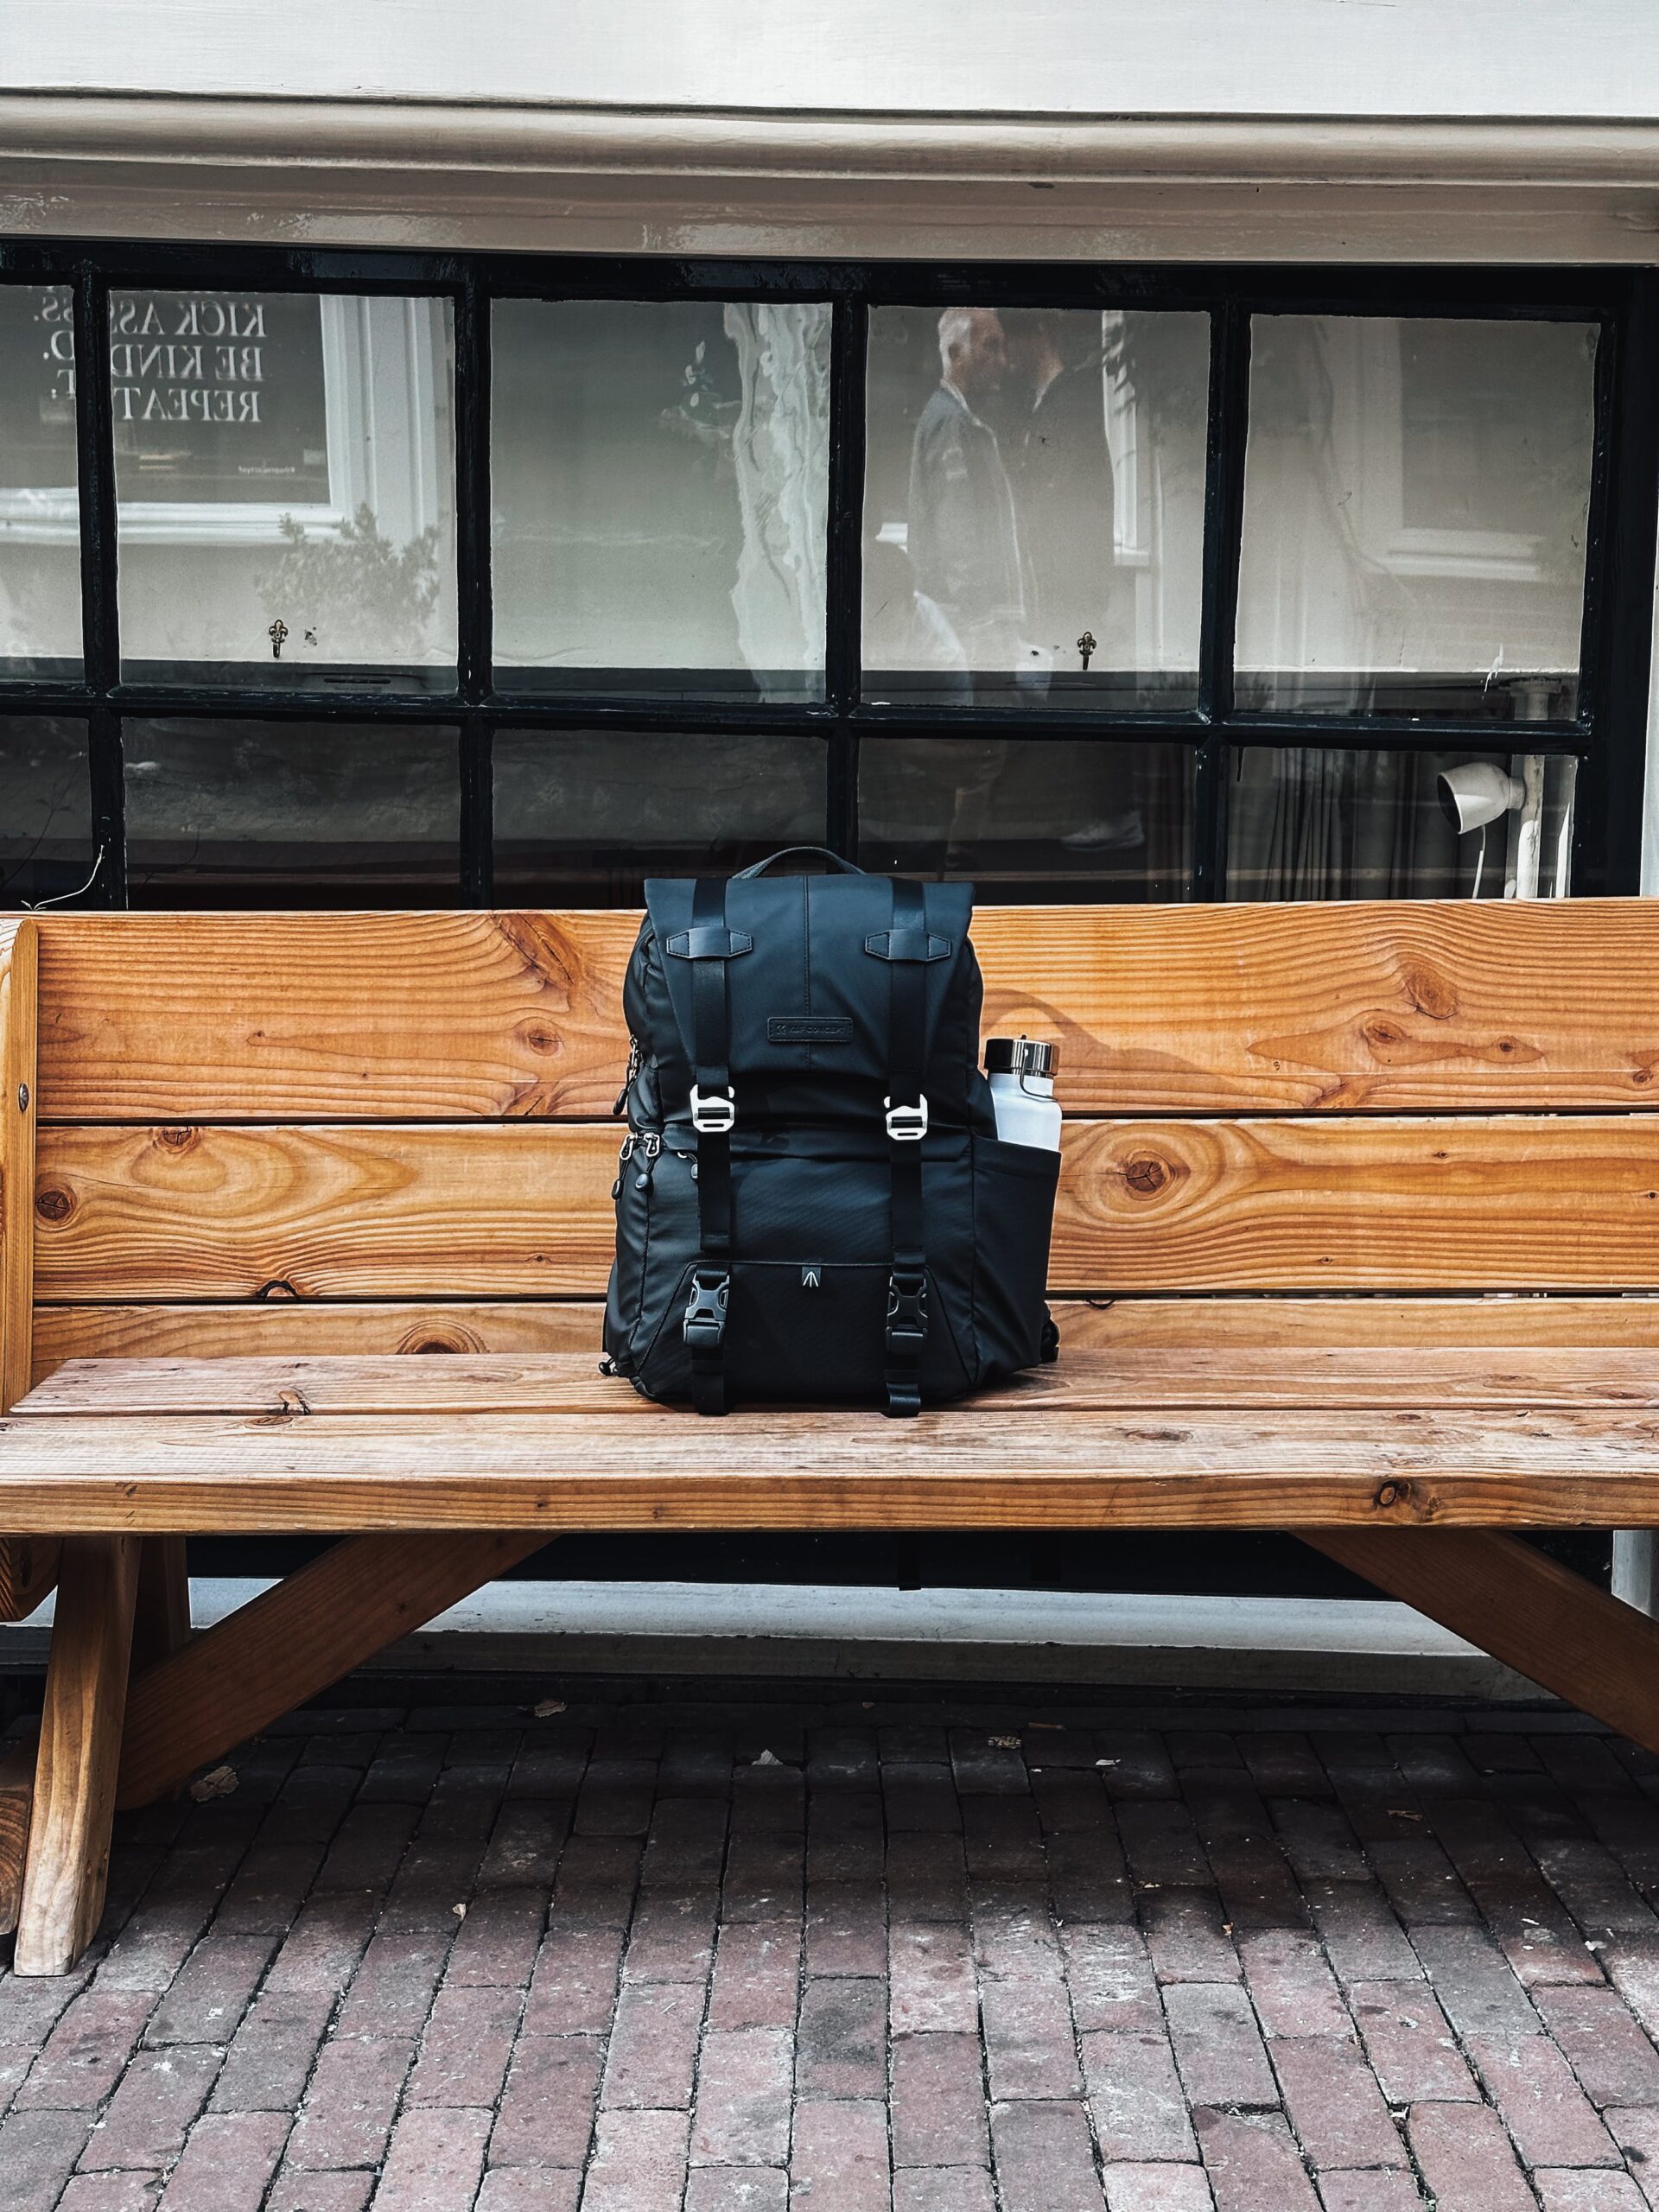 How Do You Find The Best Skateboard Backpack For Carrying Your Gear?